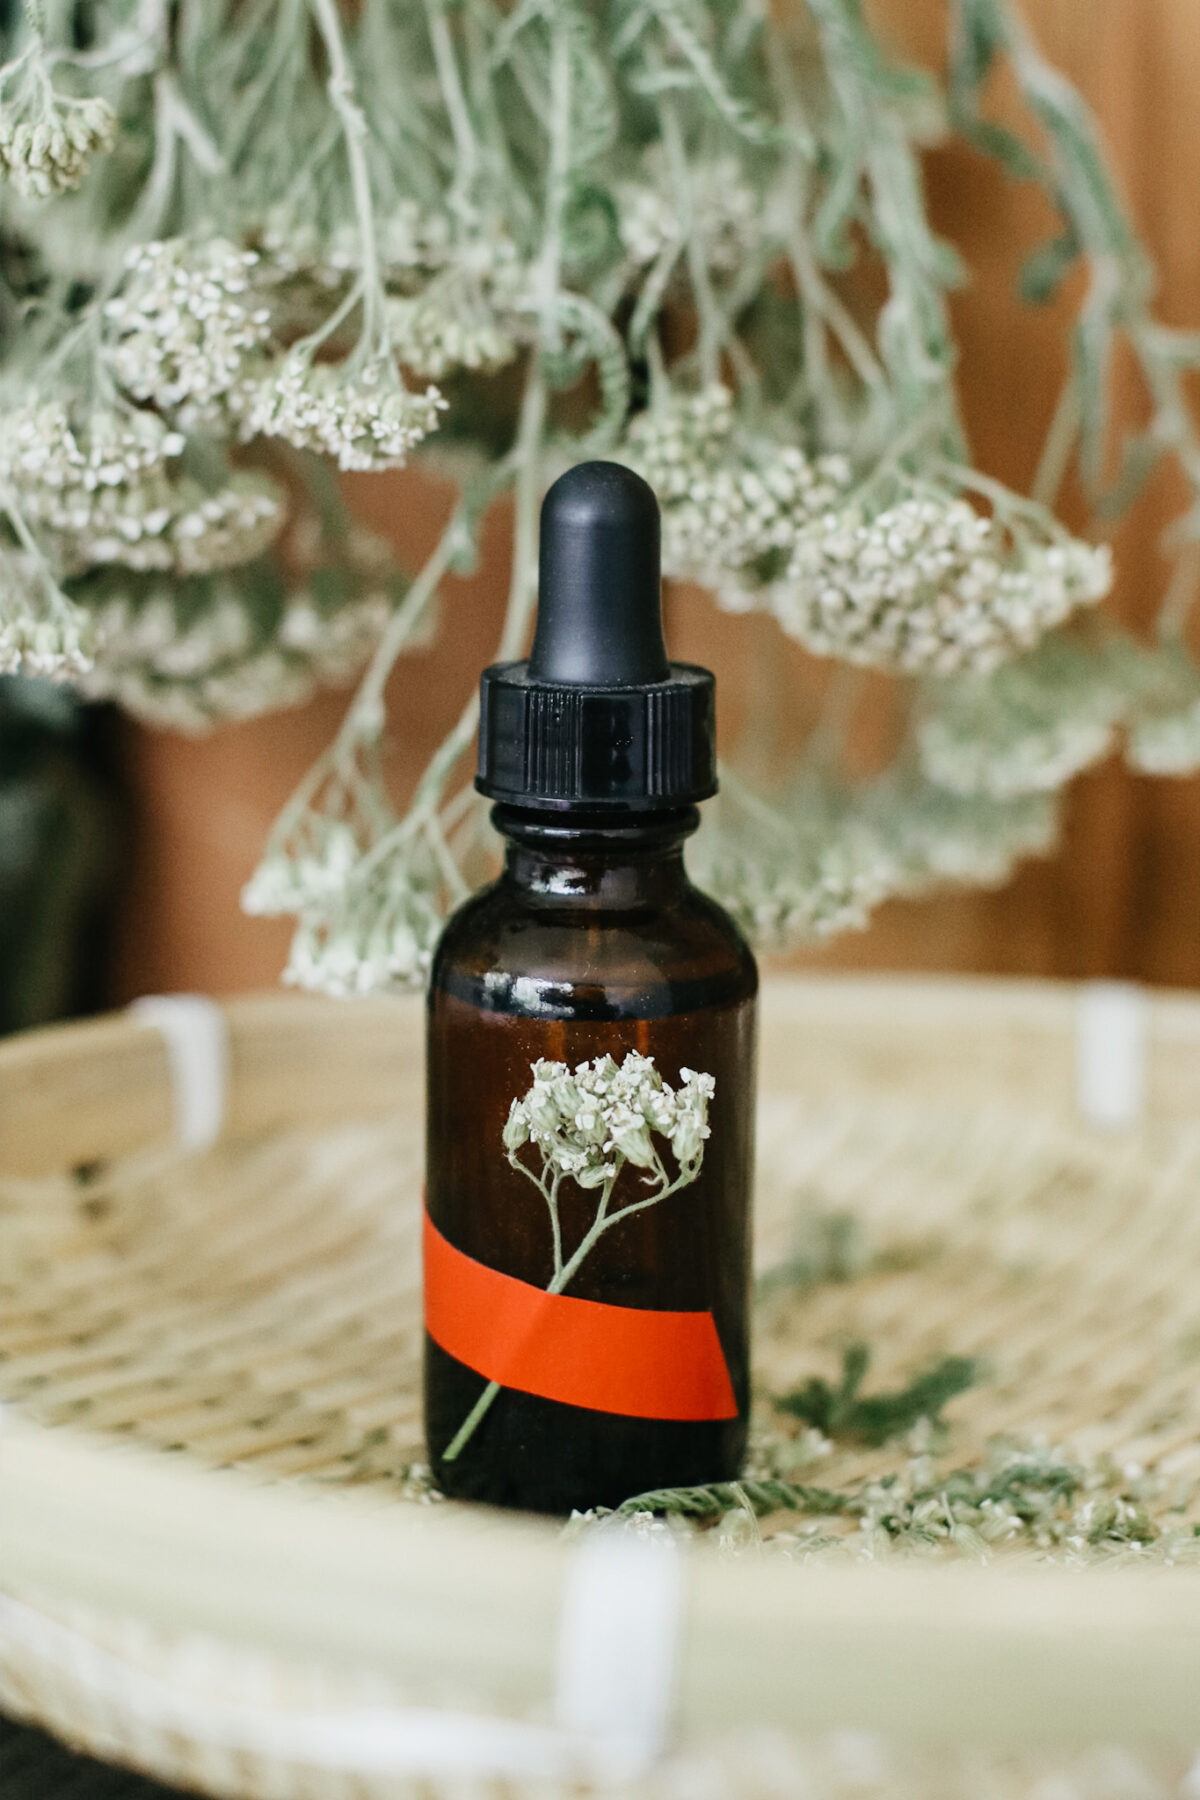 yarrow tincture sitting on basket with yarrow hanging in background